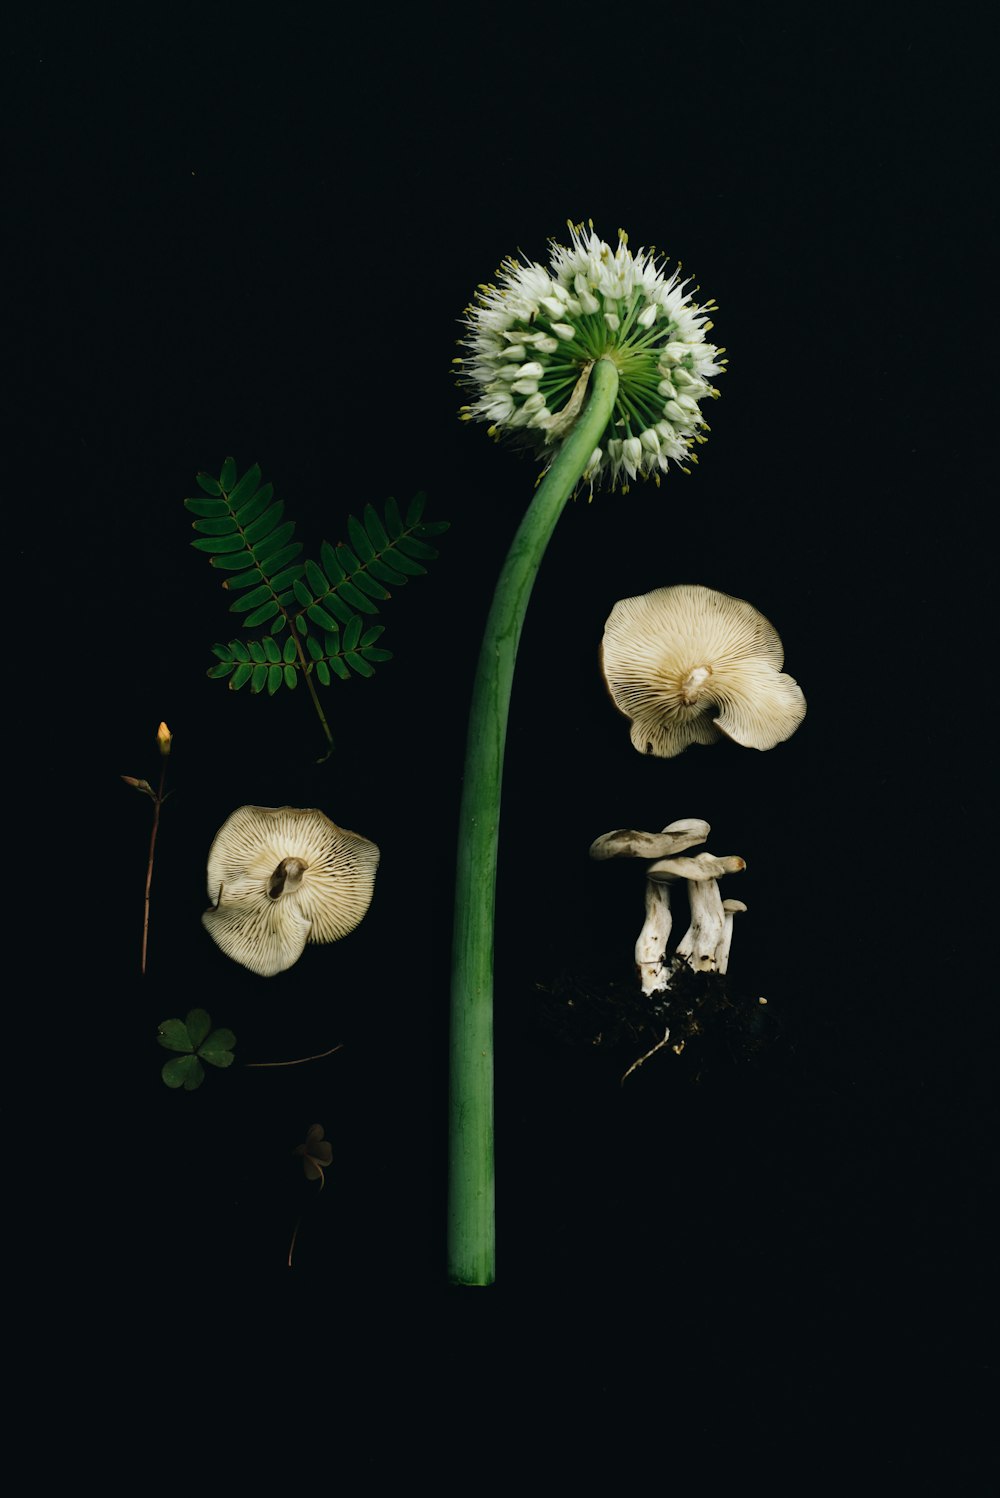 a group of mushrooms and a plant on a black background